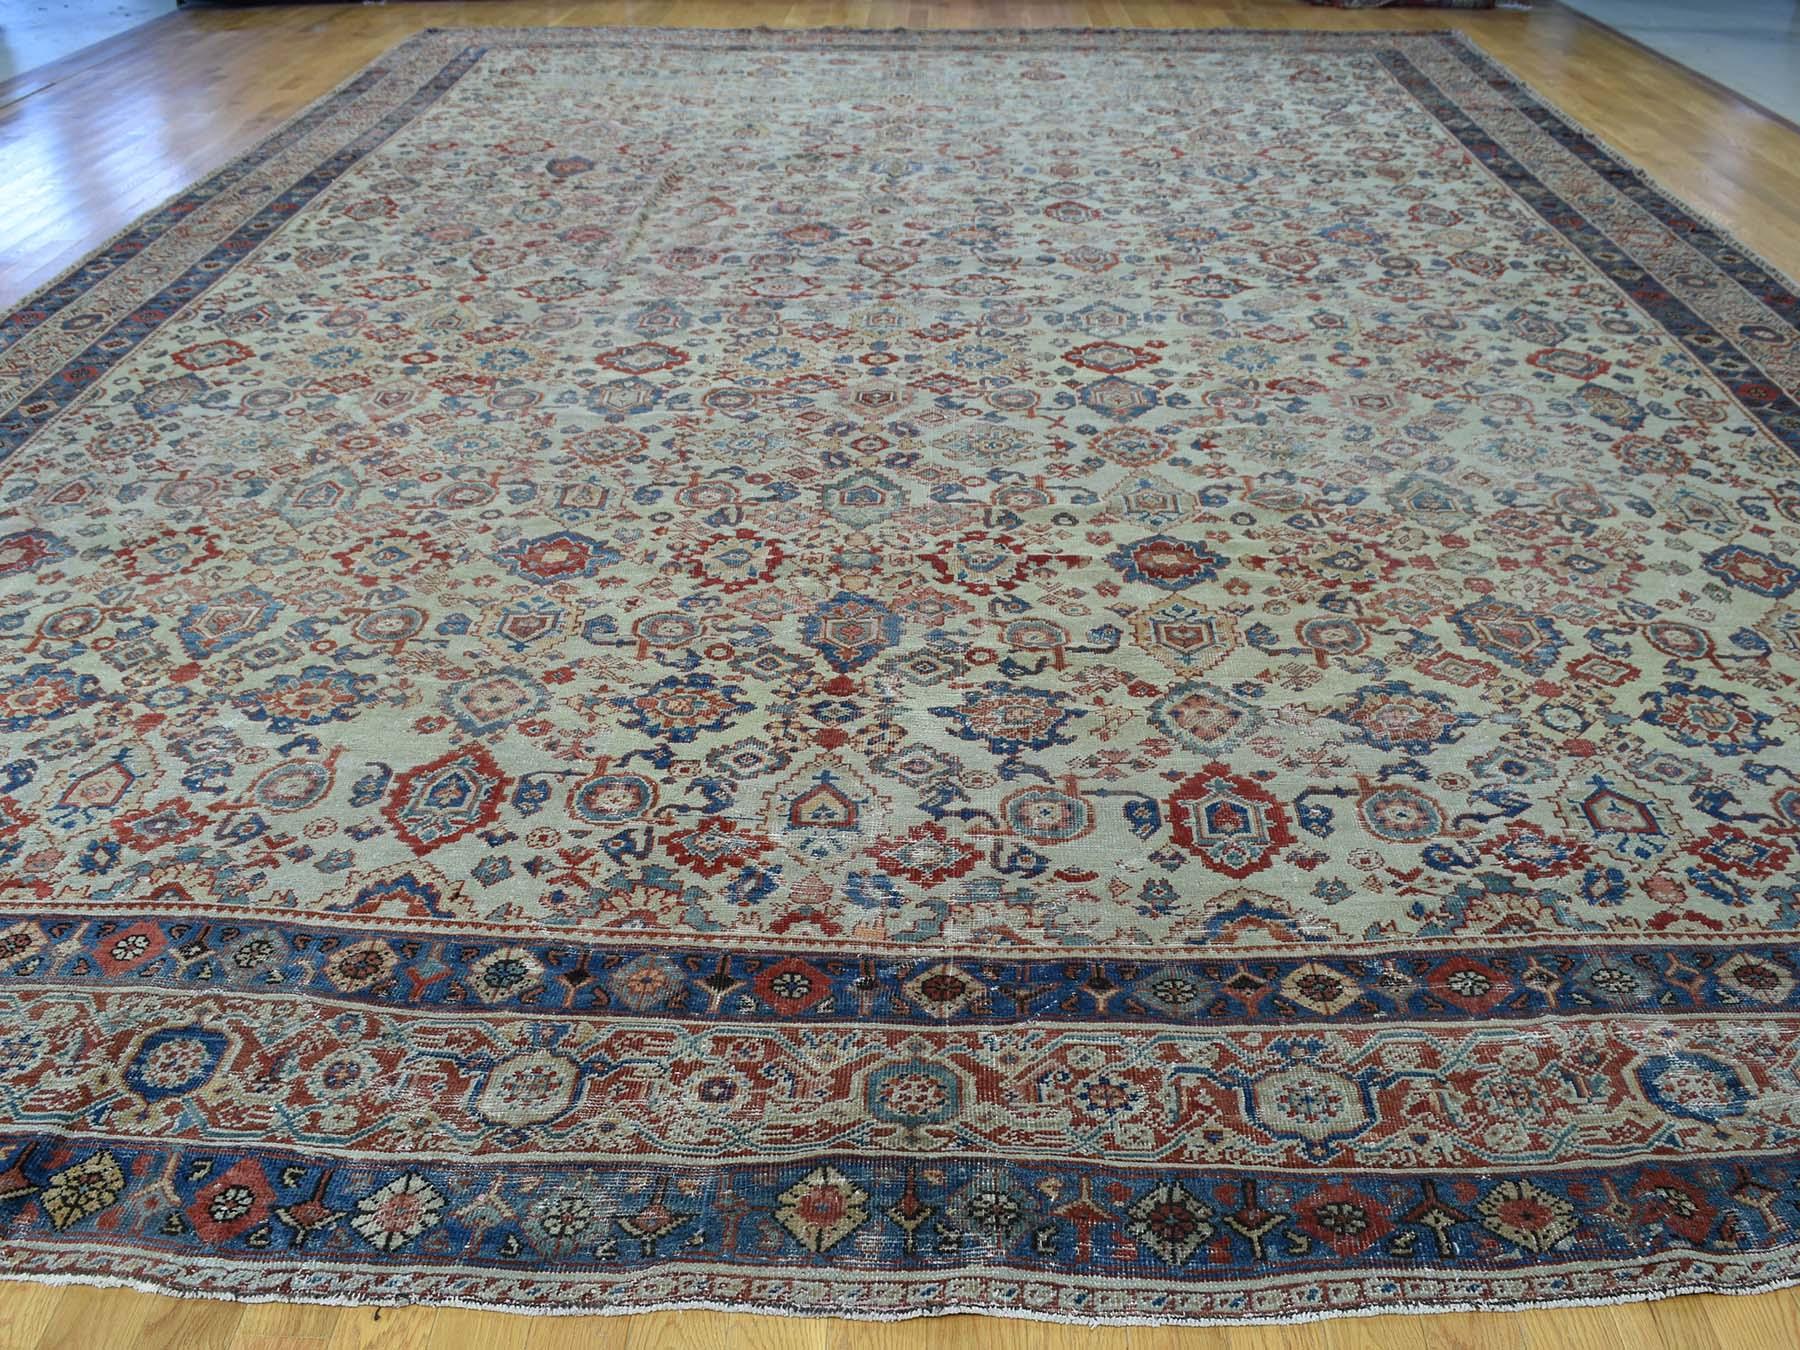 Late 19th Century Ivory All-Over Design 1880 Antique Handmade Persian Mahal Rug